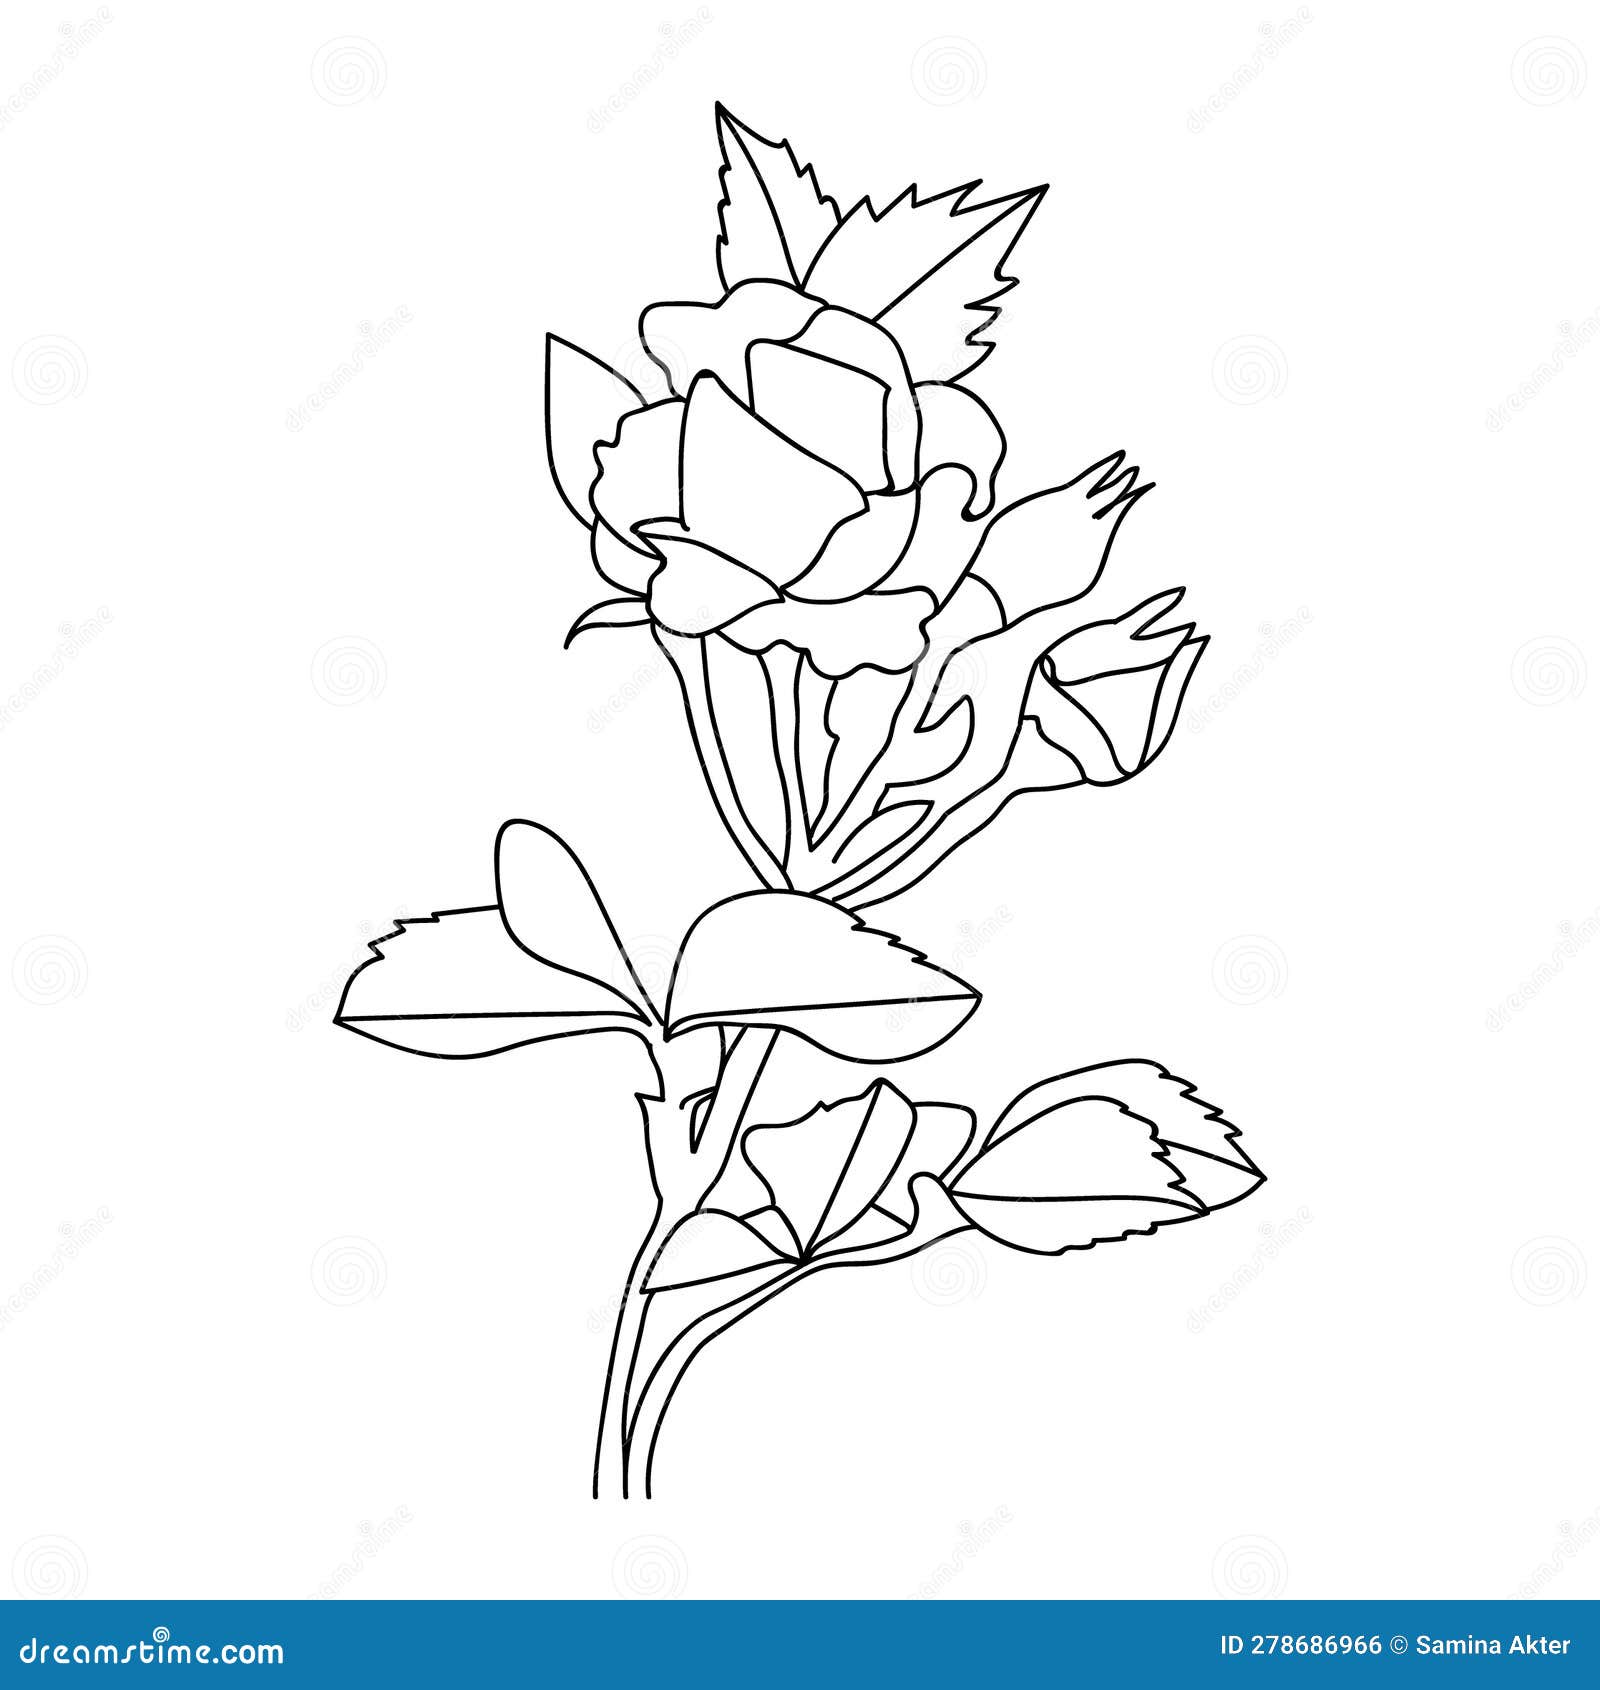 easy rose line art flower drawing kids natural coloring pages adults children pencil cute sketch simple cartoon 278686966